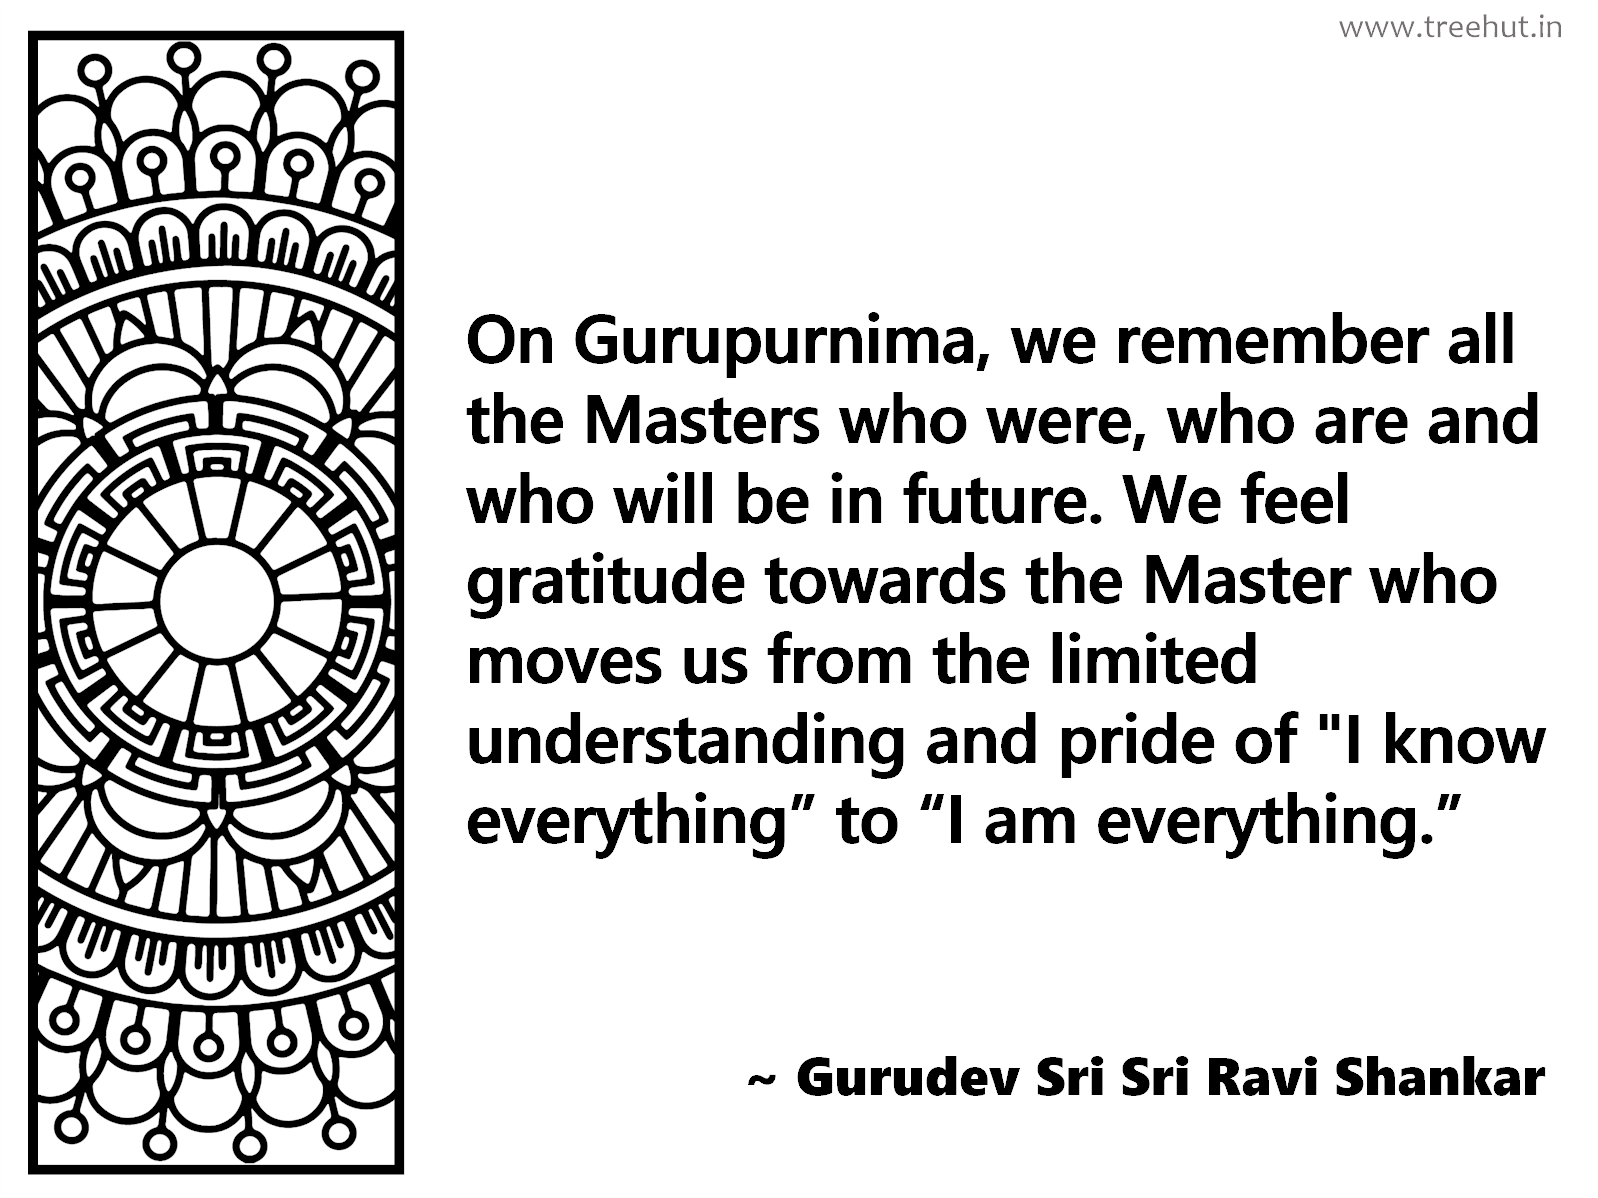 On Gurupurnima, we remember all the Masters who were, who are and who will be in future. We feel gratitude towards the Master who moves us from the limited understanding and pride of 